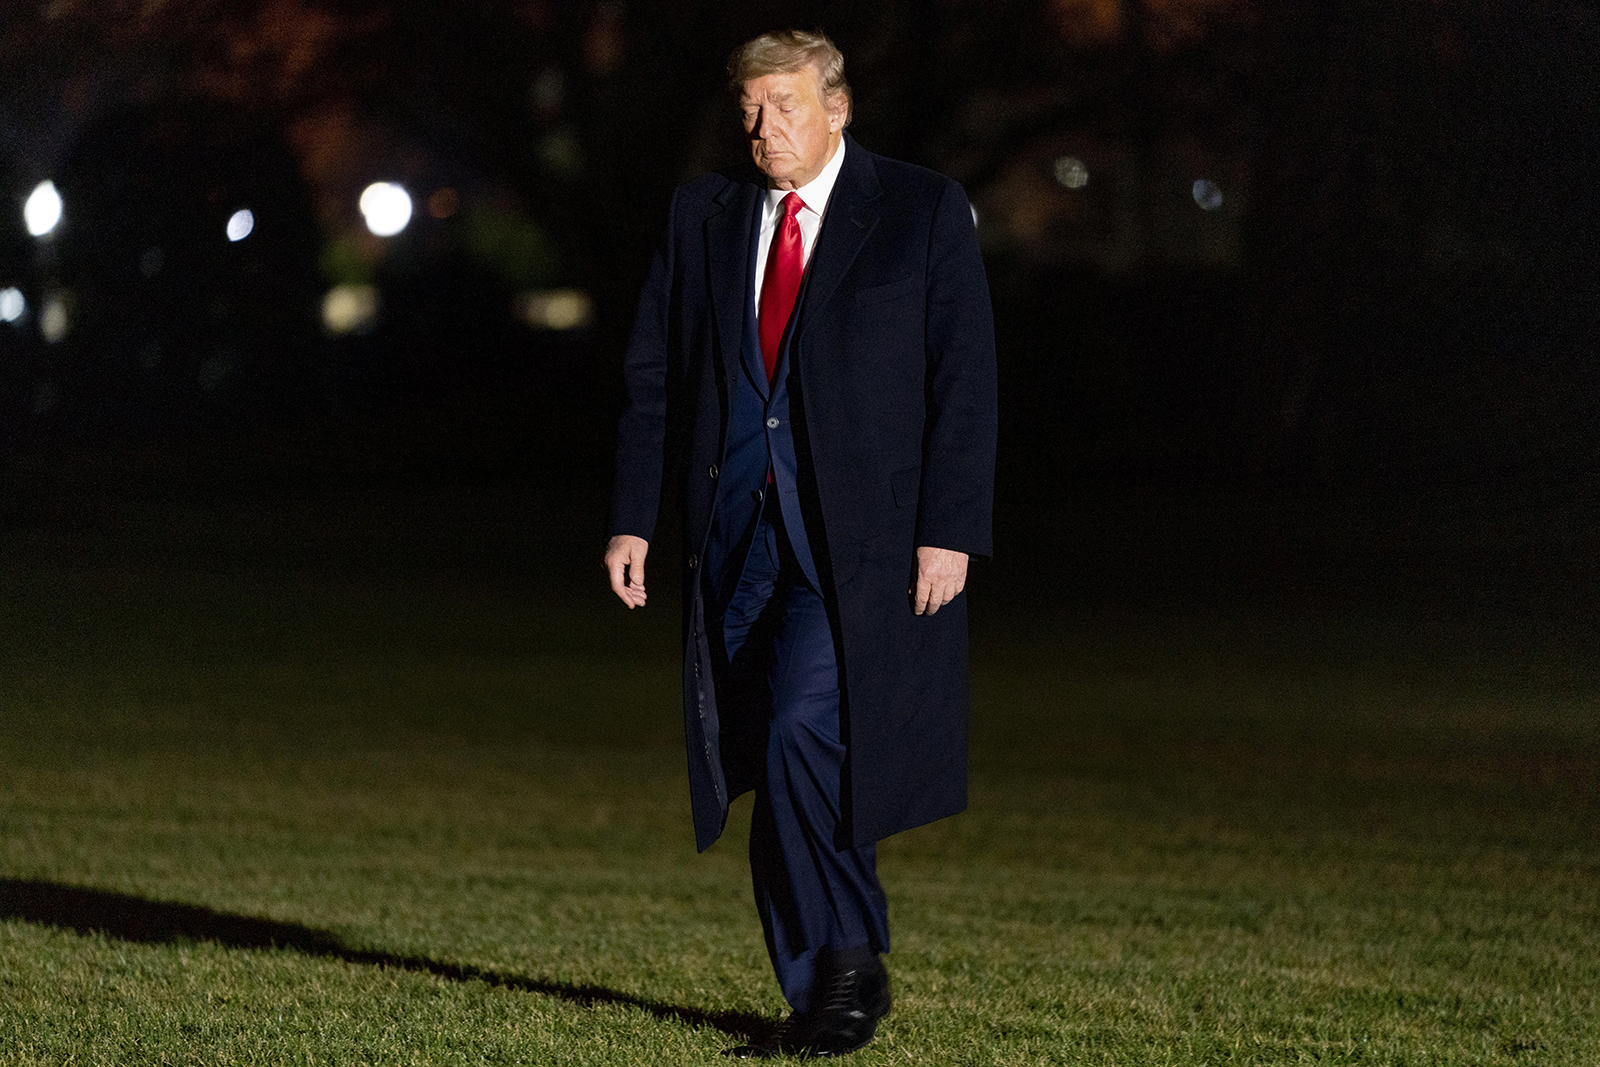 President Donald Trump arrives in the early morning hours on Tuesday, January 5 at the White House in Washington.